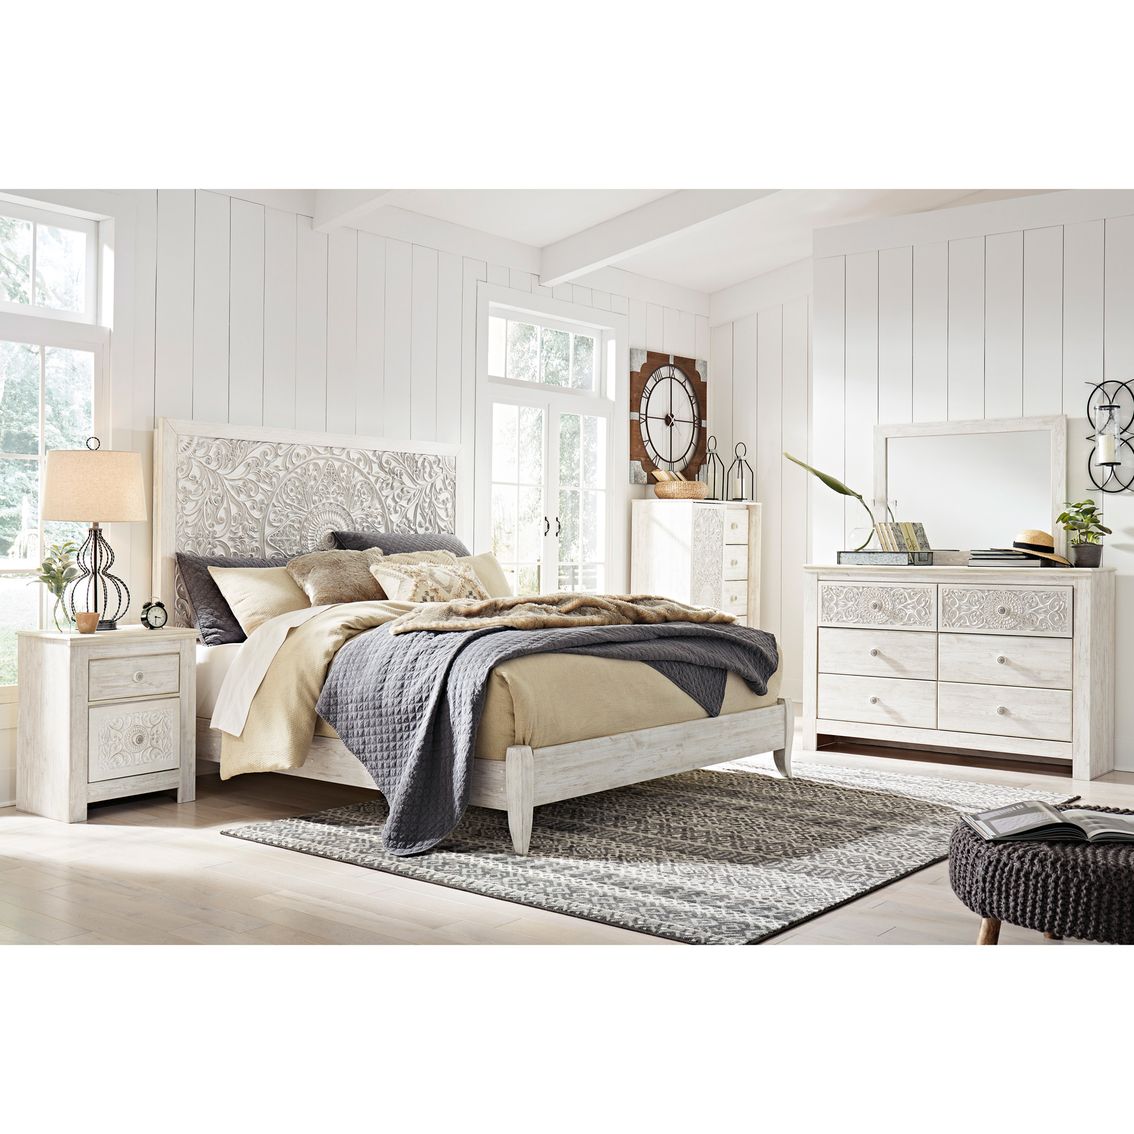 Create a Luxurious Sanctuary with the
Ashley Queen Bedroom Set